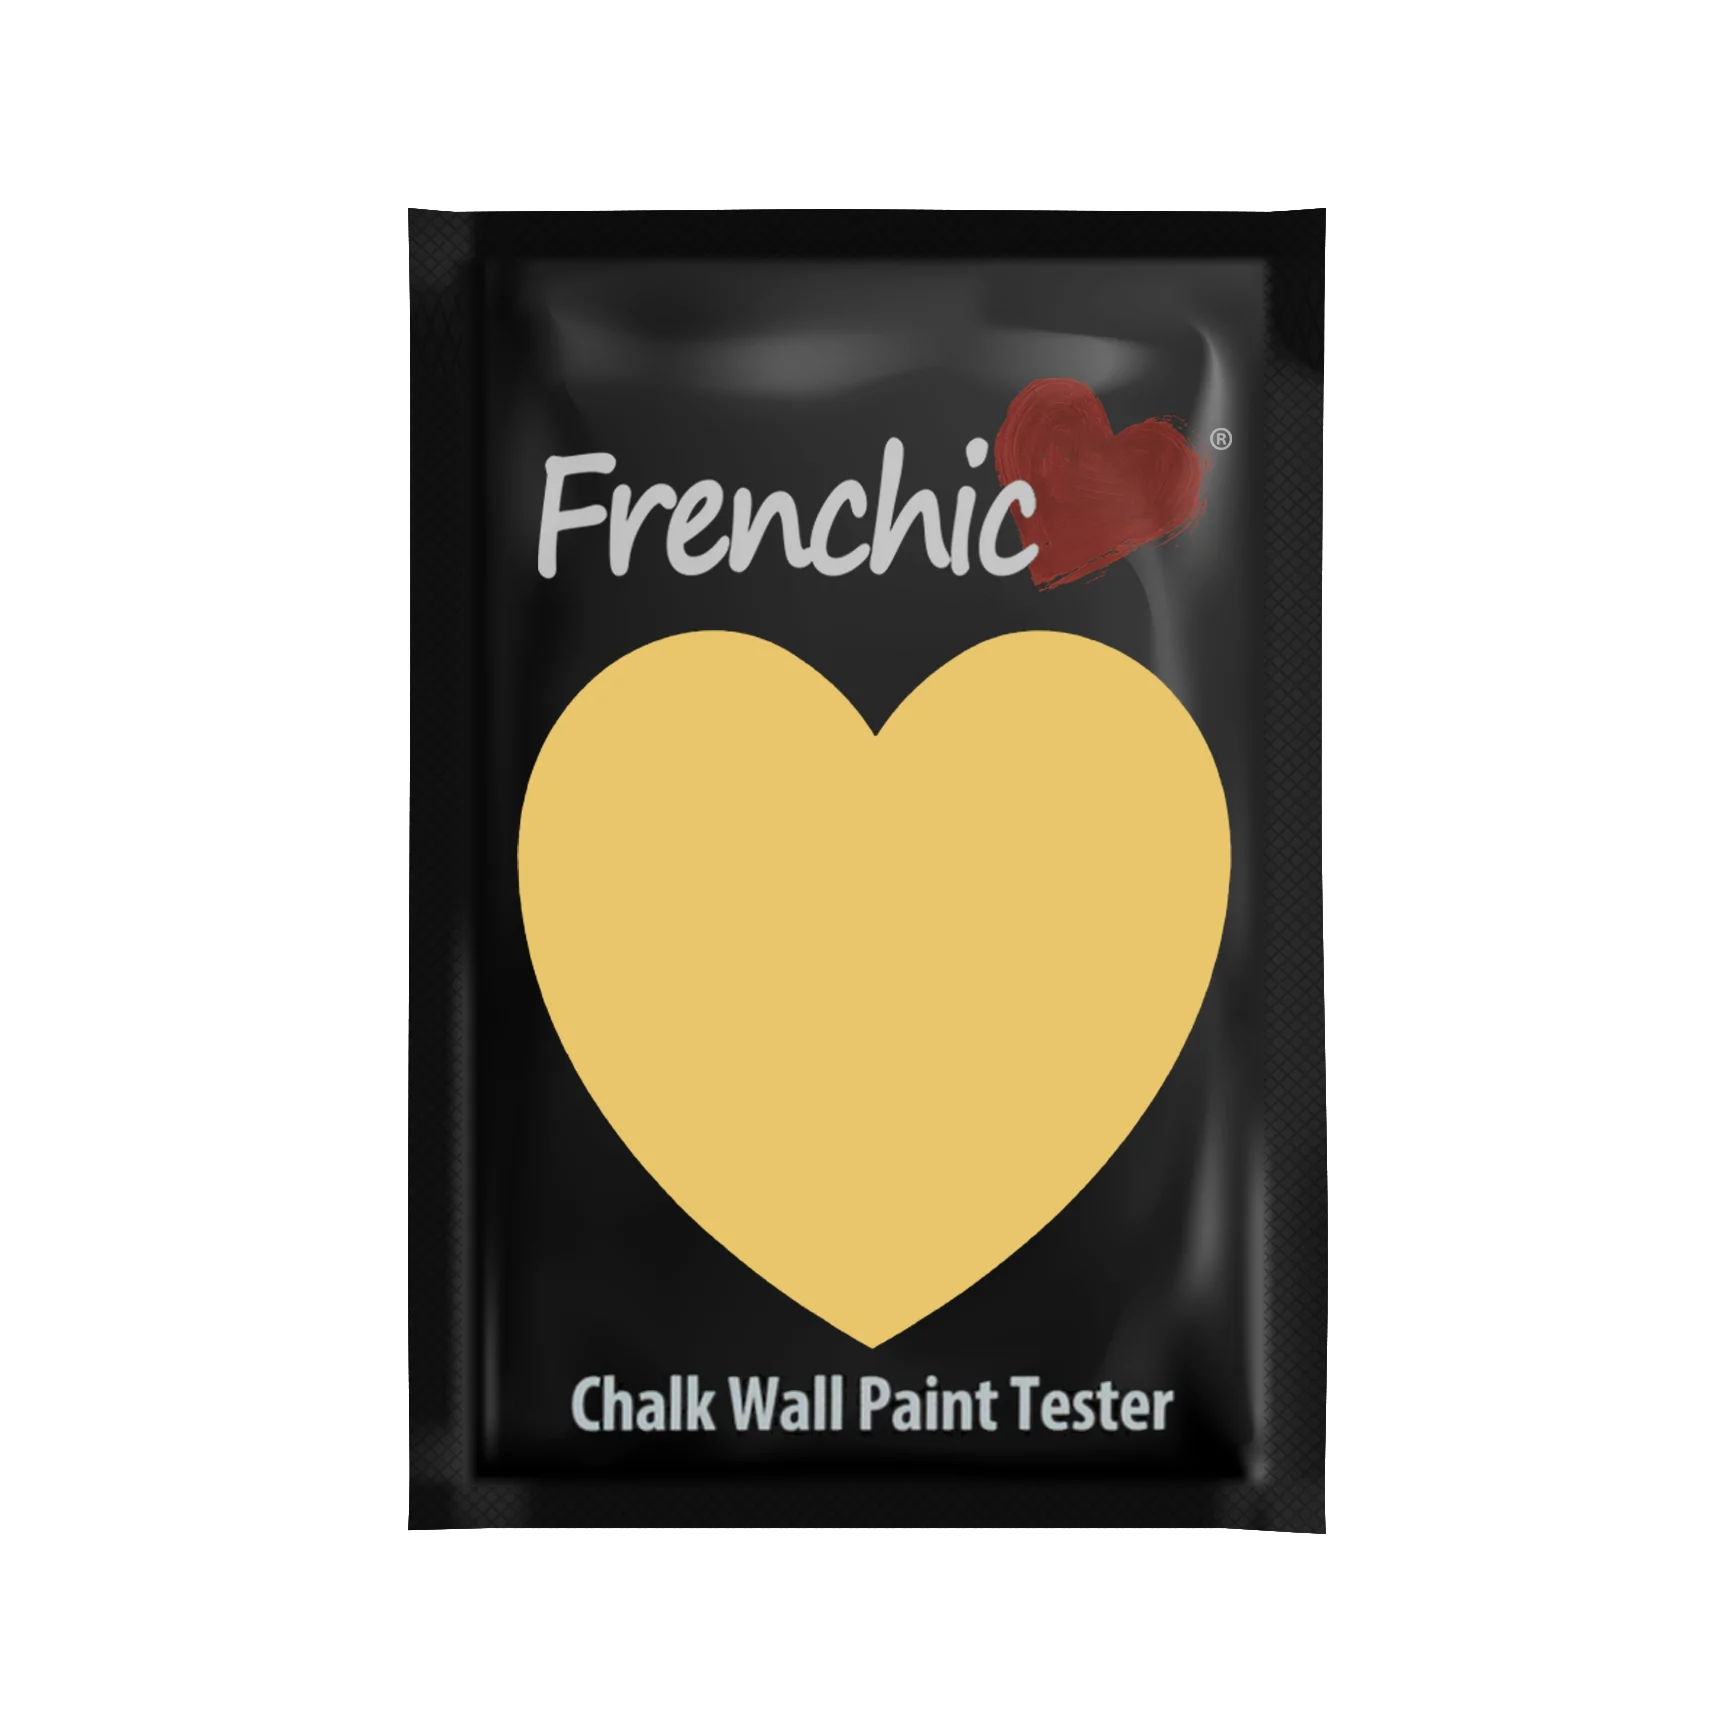 Frenchic Paint | Hot As Mustard Wall Paint Sample by Weirs of Baggot Street